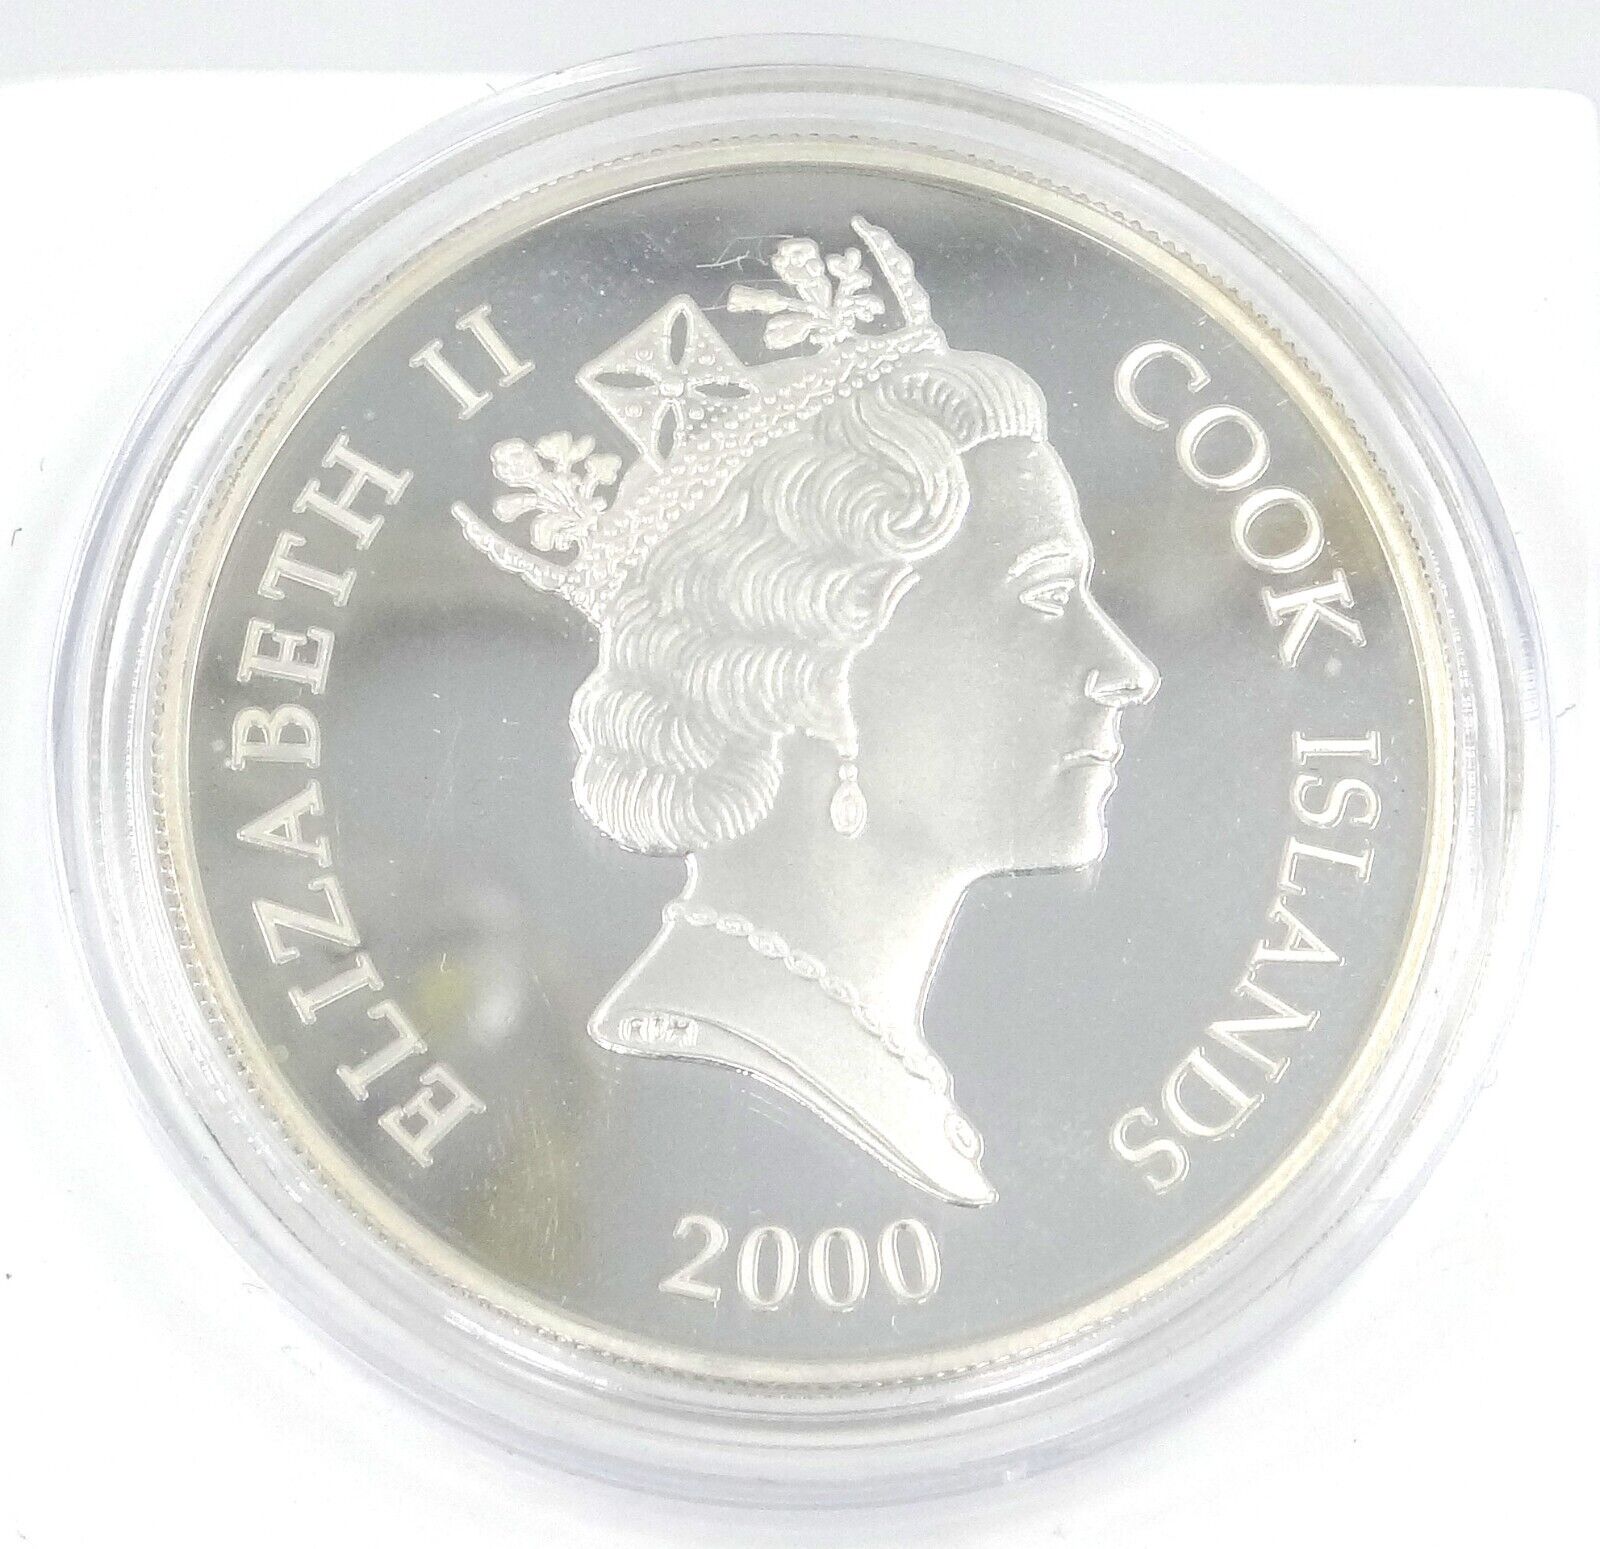 25g Silver Coin 2000 $5 Cook Islands Marine Life Protection Comber Fish-classypw.com-1